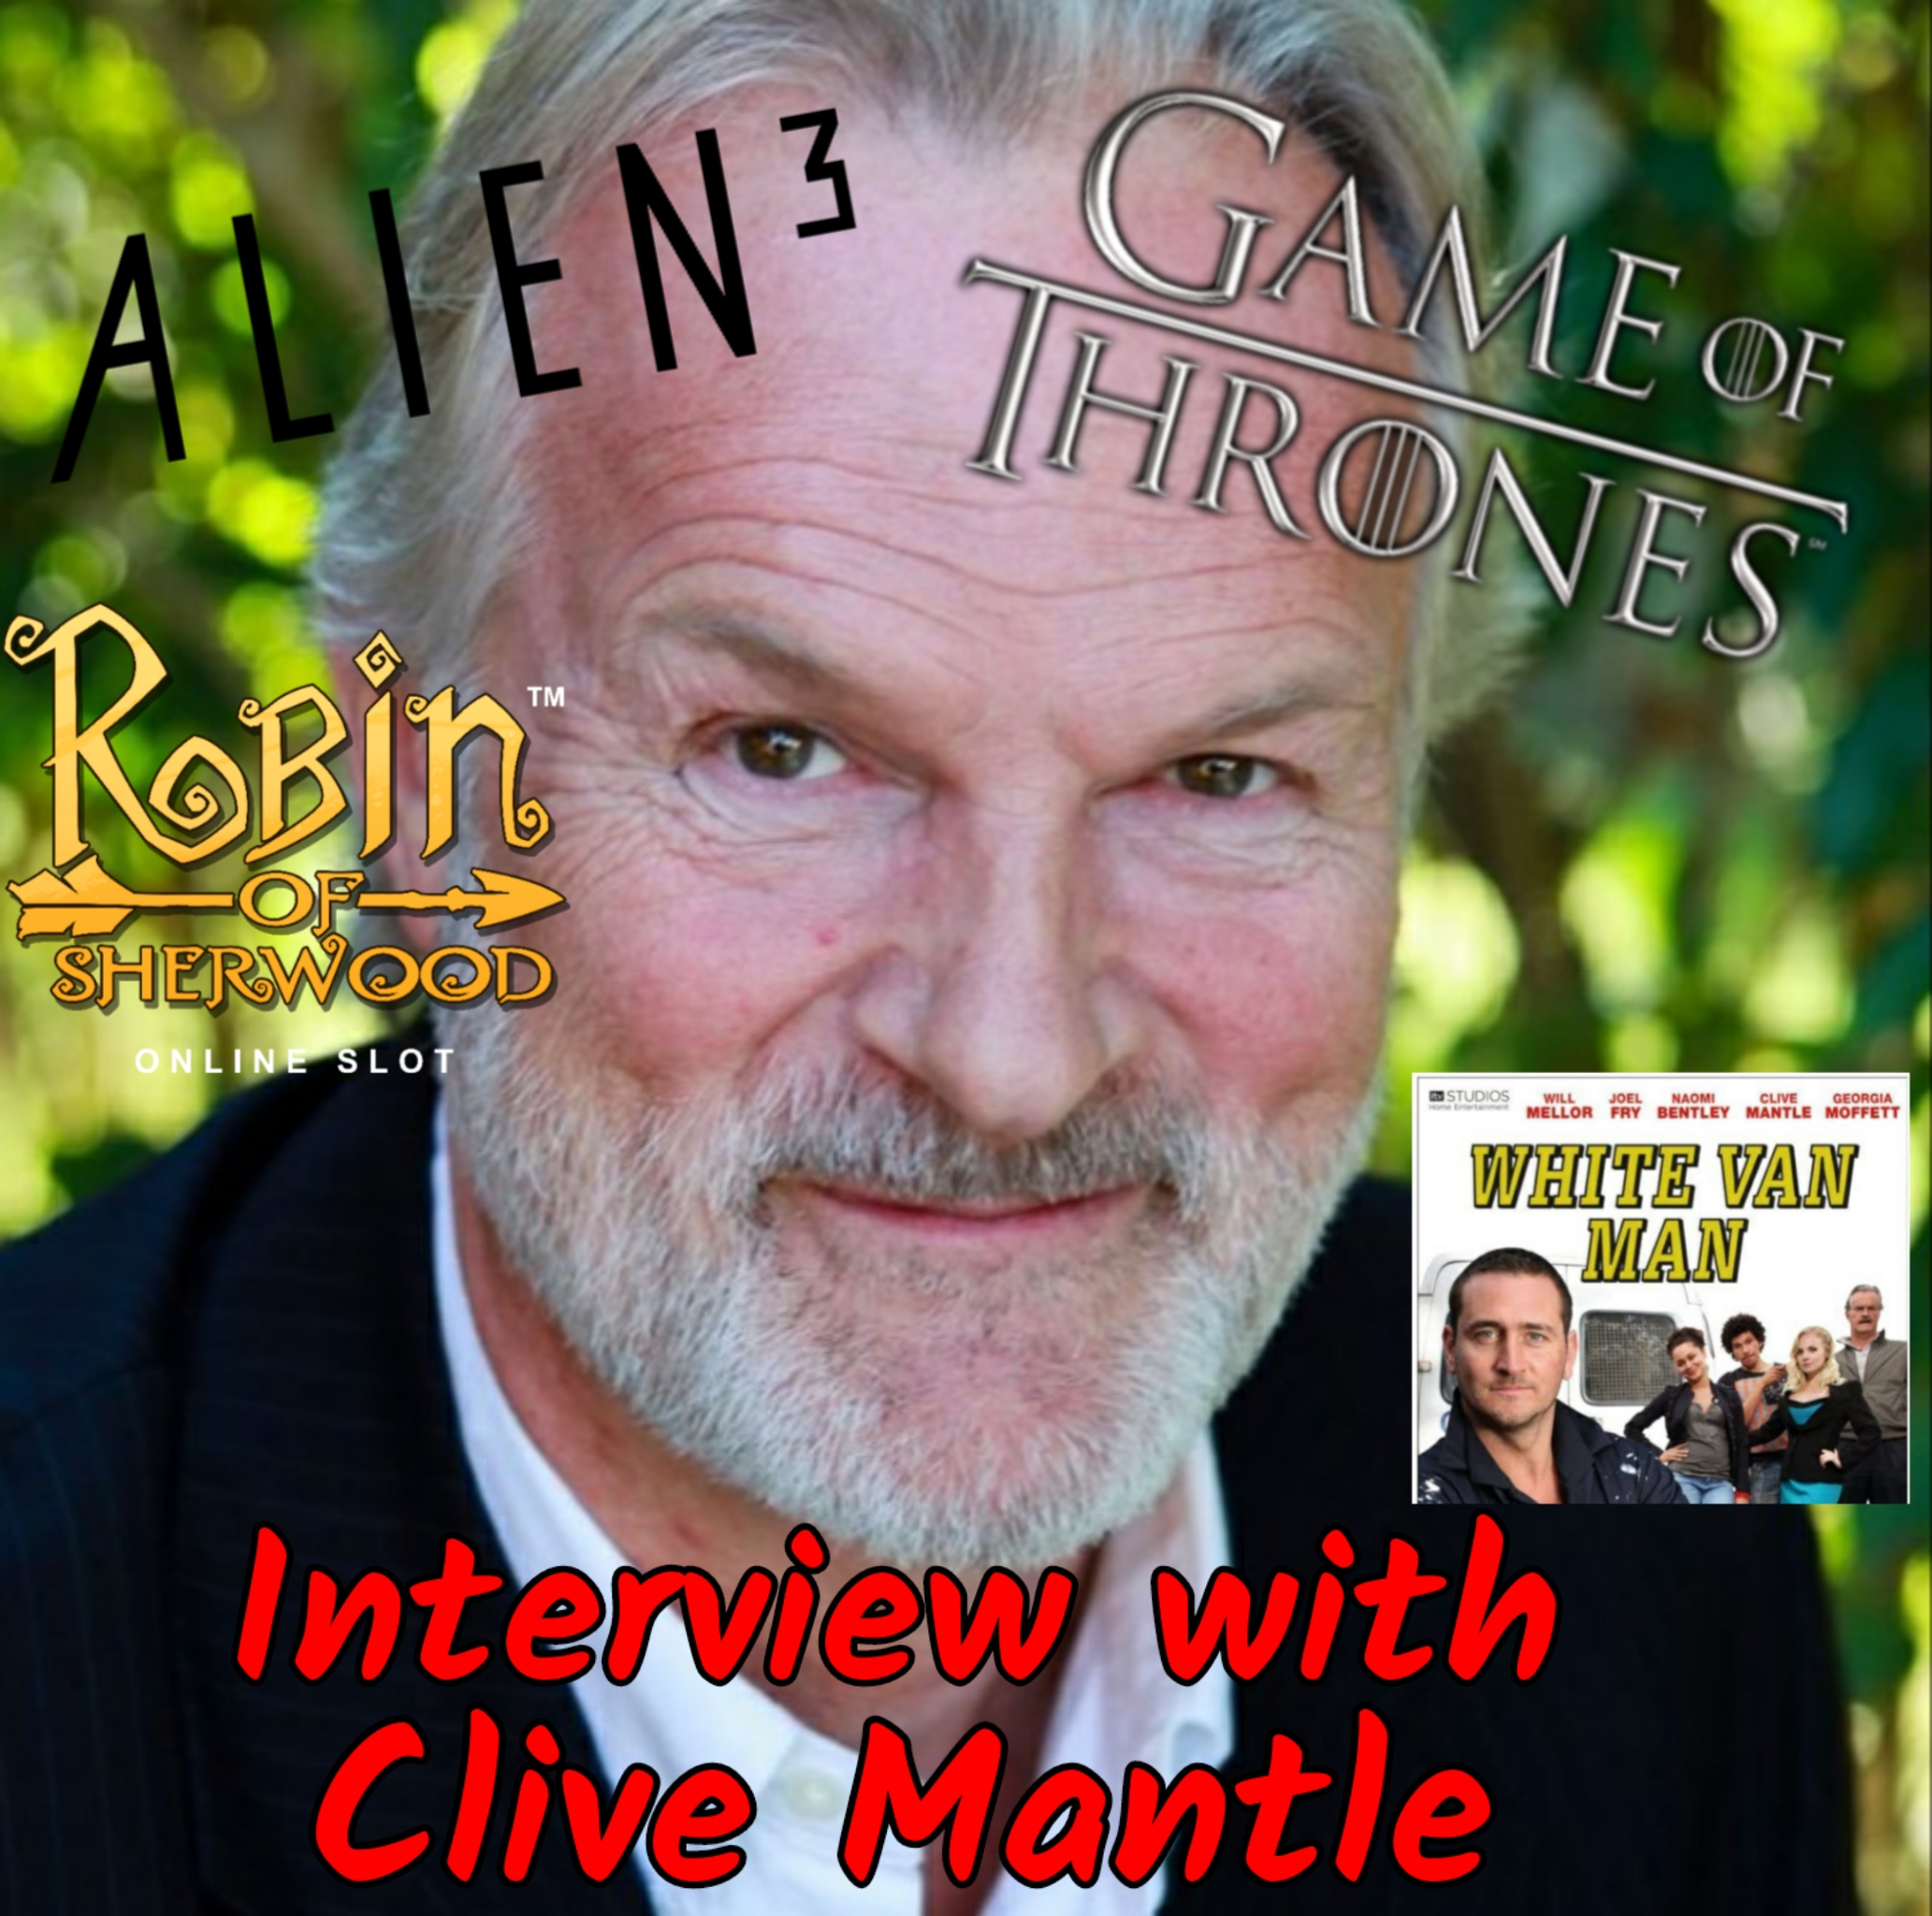 Interview with Clive Mantle